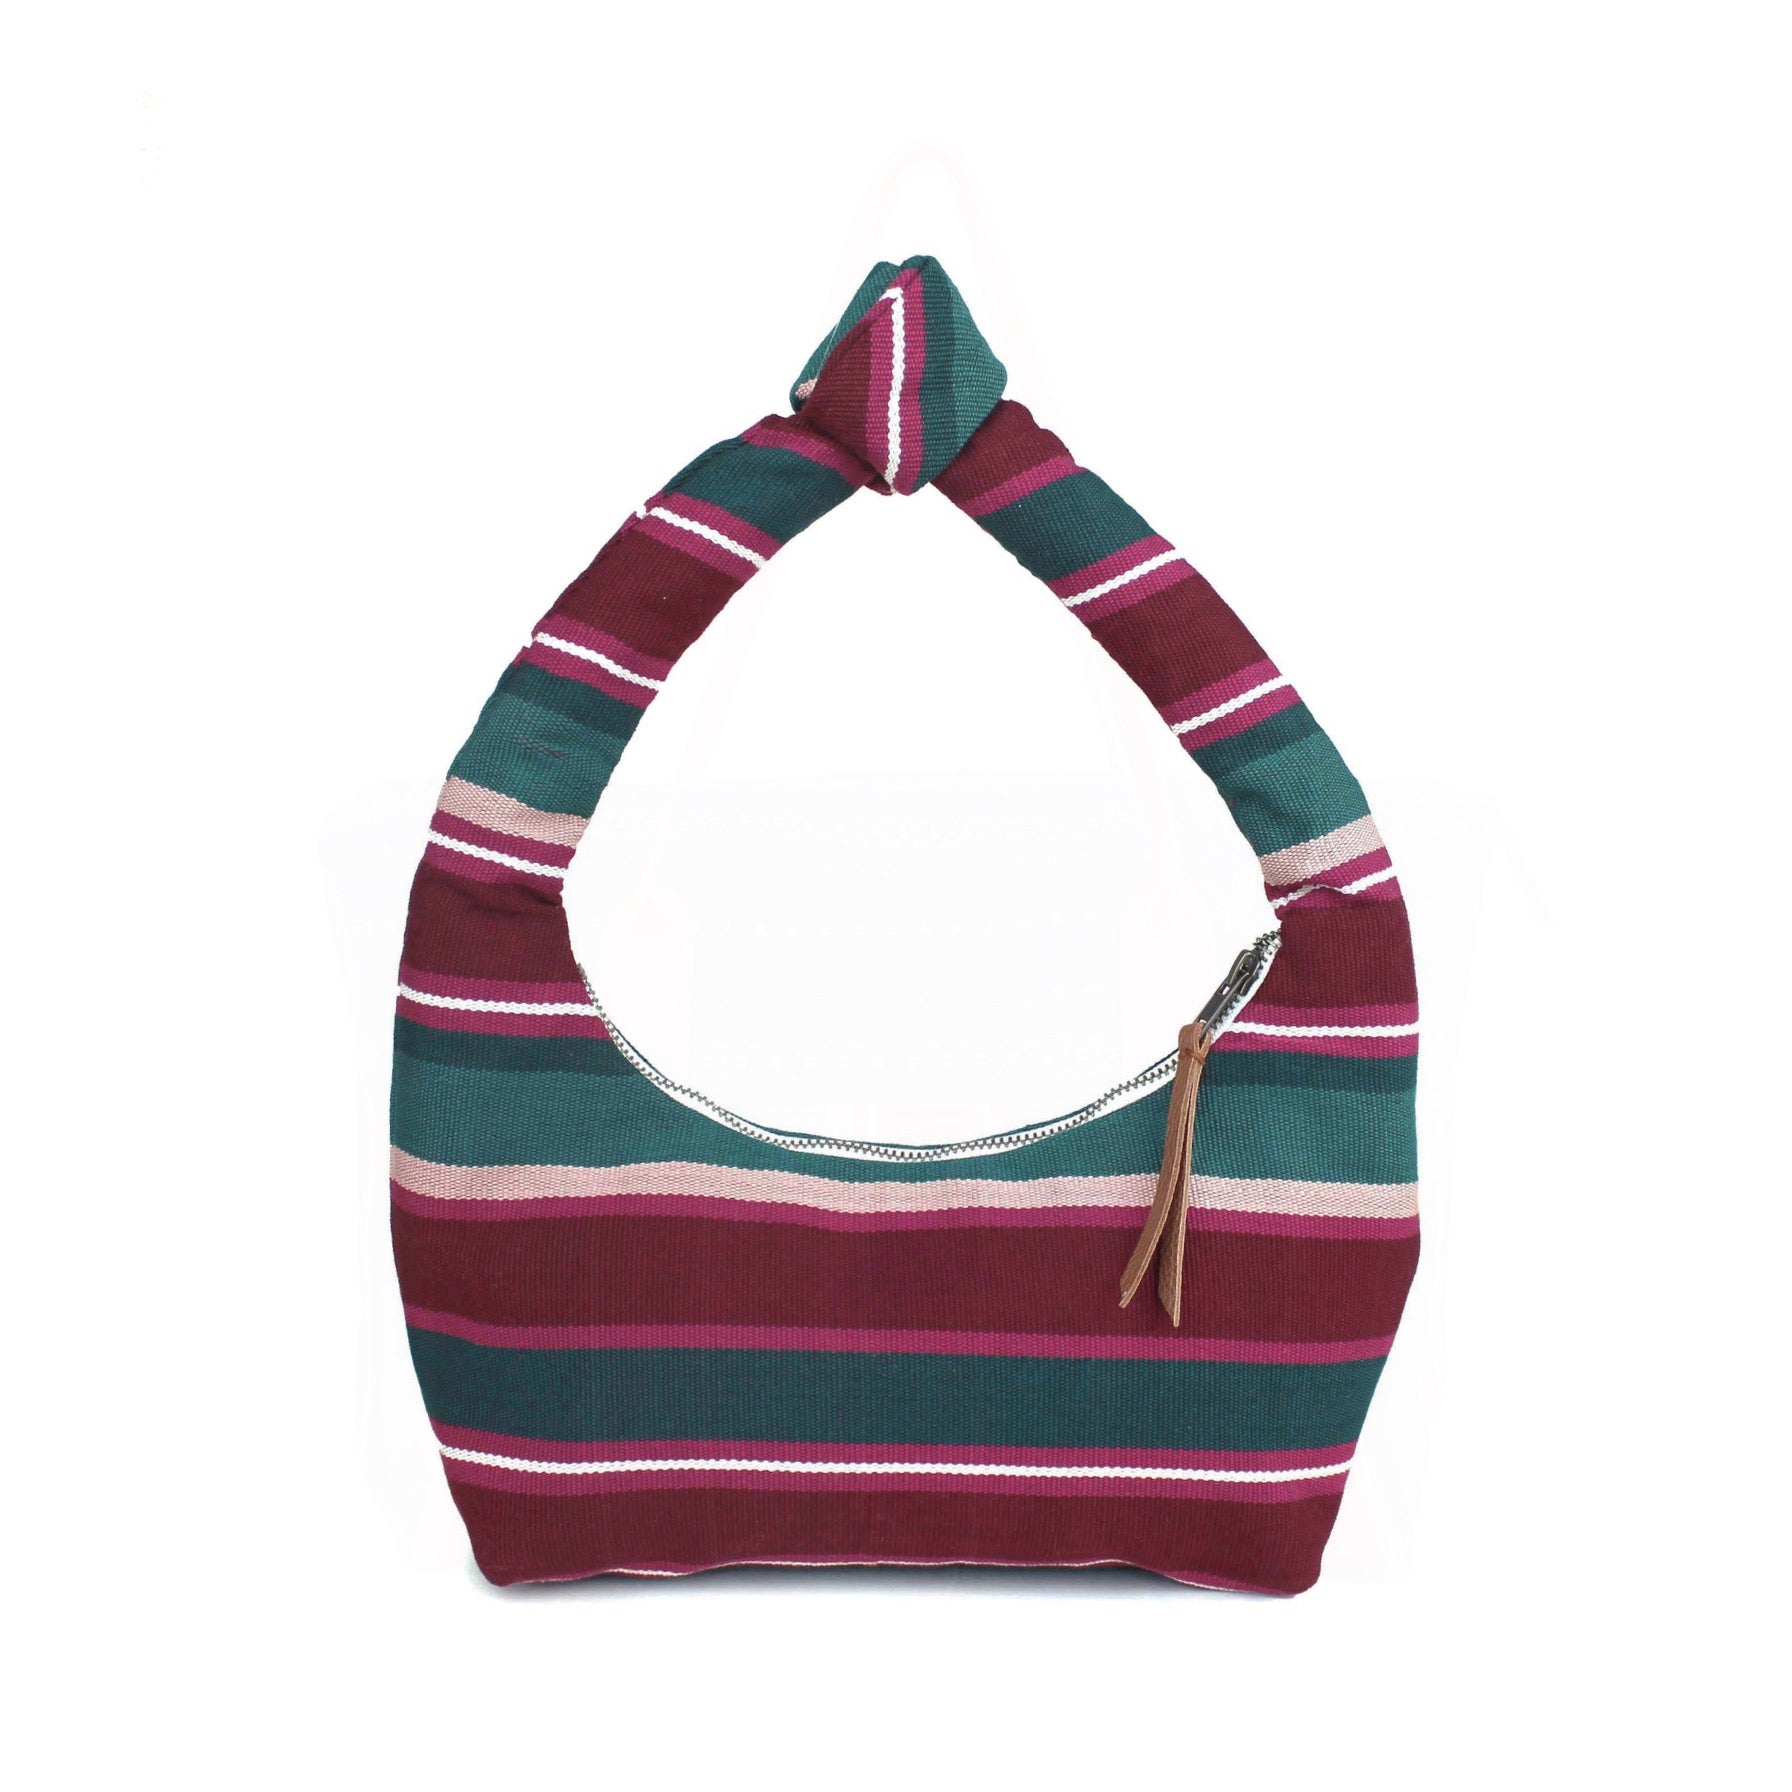 Aurora Handwoven  Mulberry Shoulder Bag. The Mulberry pattern has horizontal stripes in phthalo green, dark pink, crimson, peach, and white. It has a leather zipper pull.